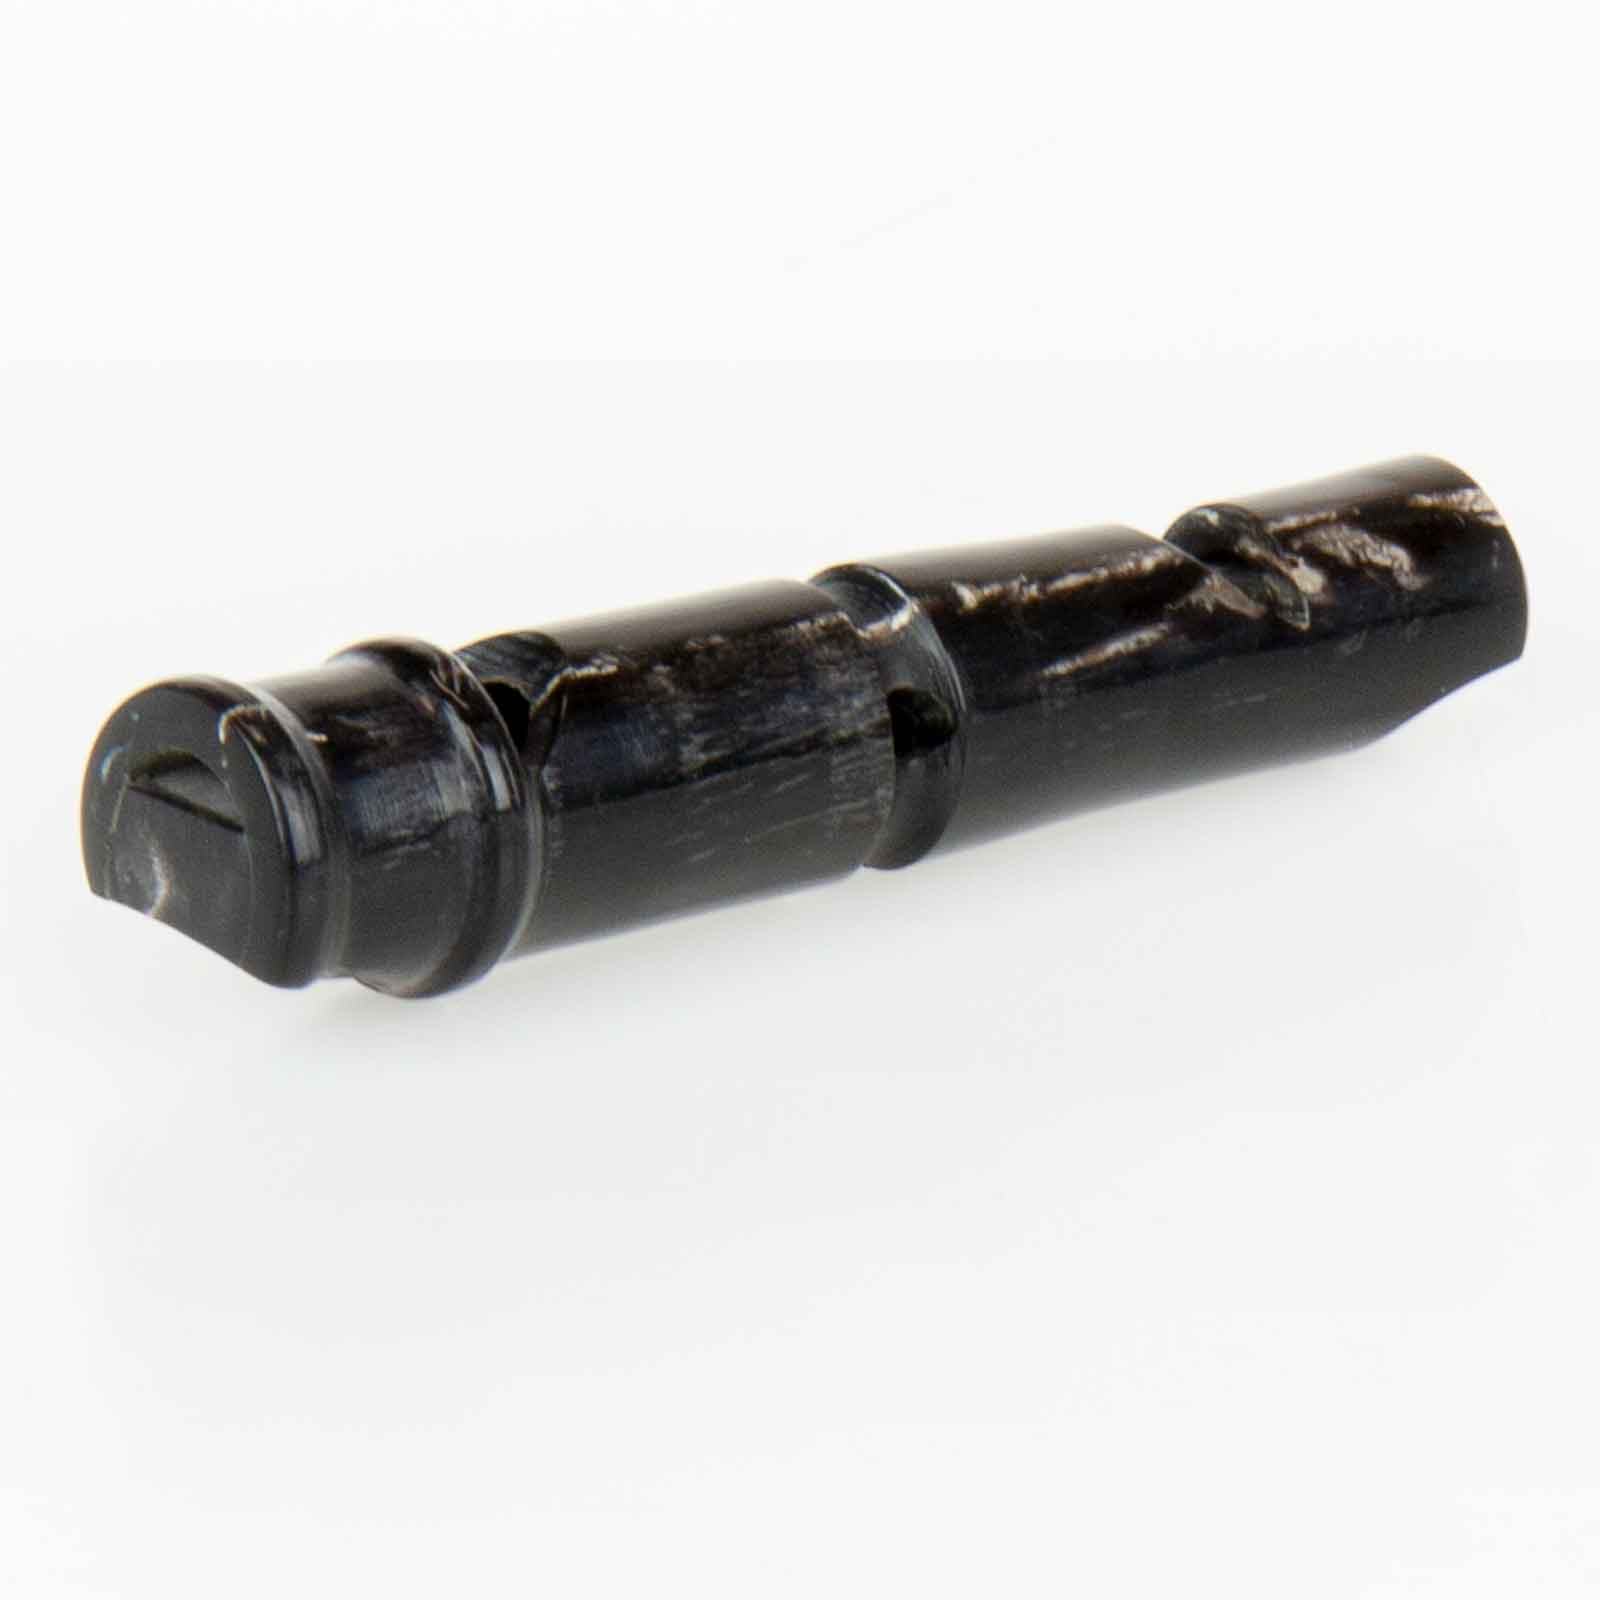 Dog Pipe Made Of Buffalo Horn About 7 Cm